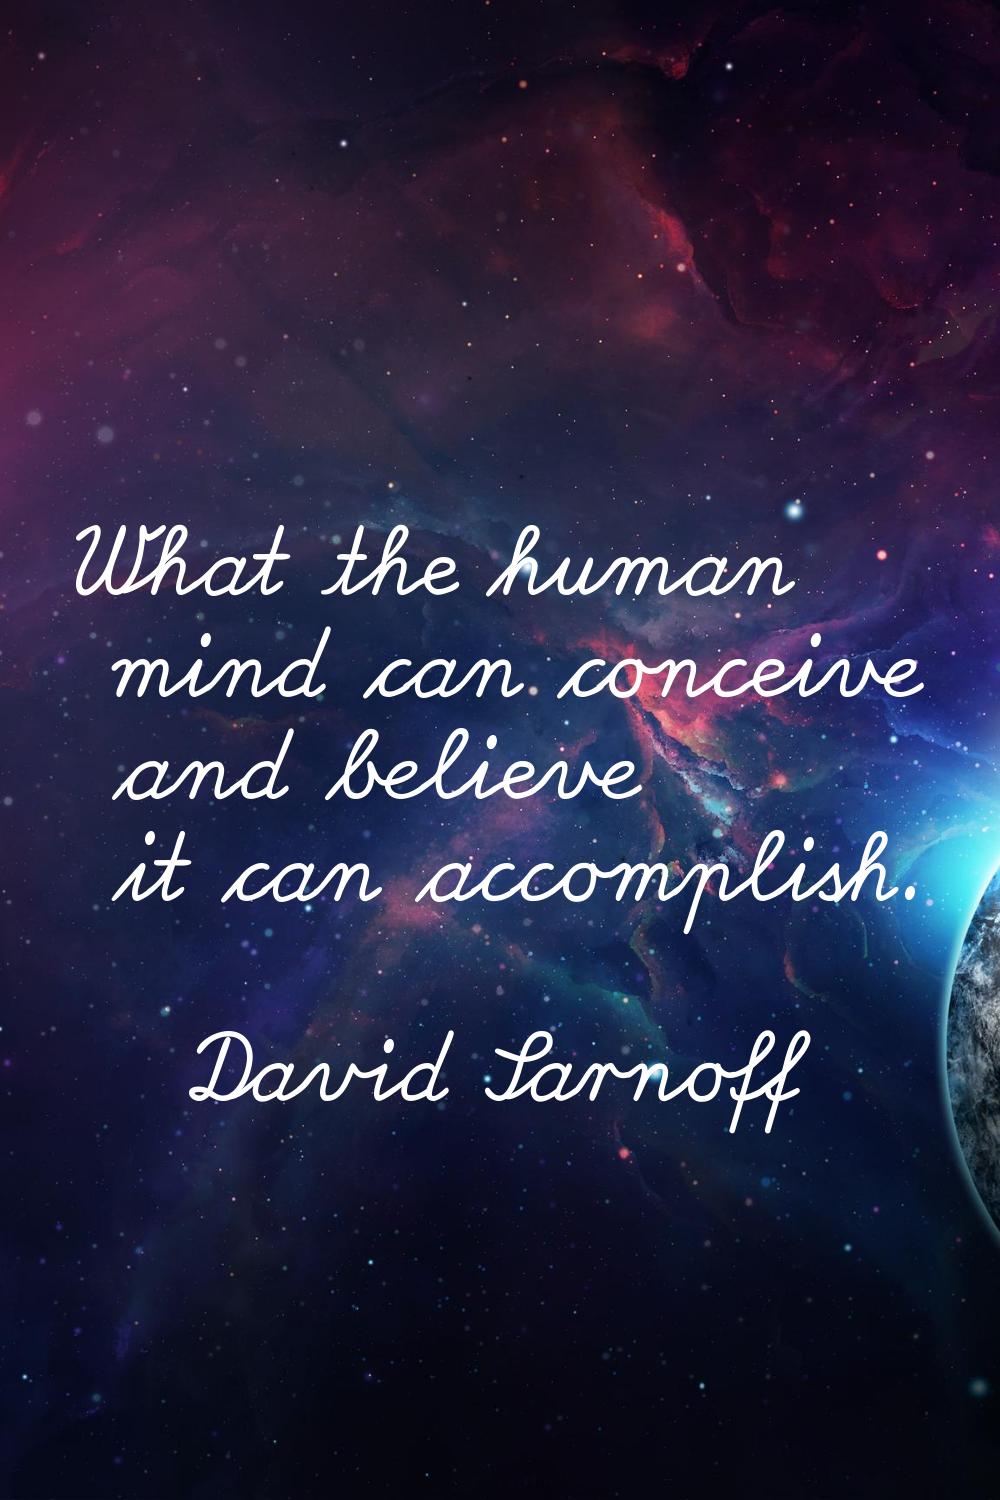 What the human mind can conceive and believe it can accomplish.